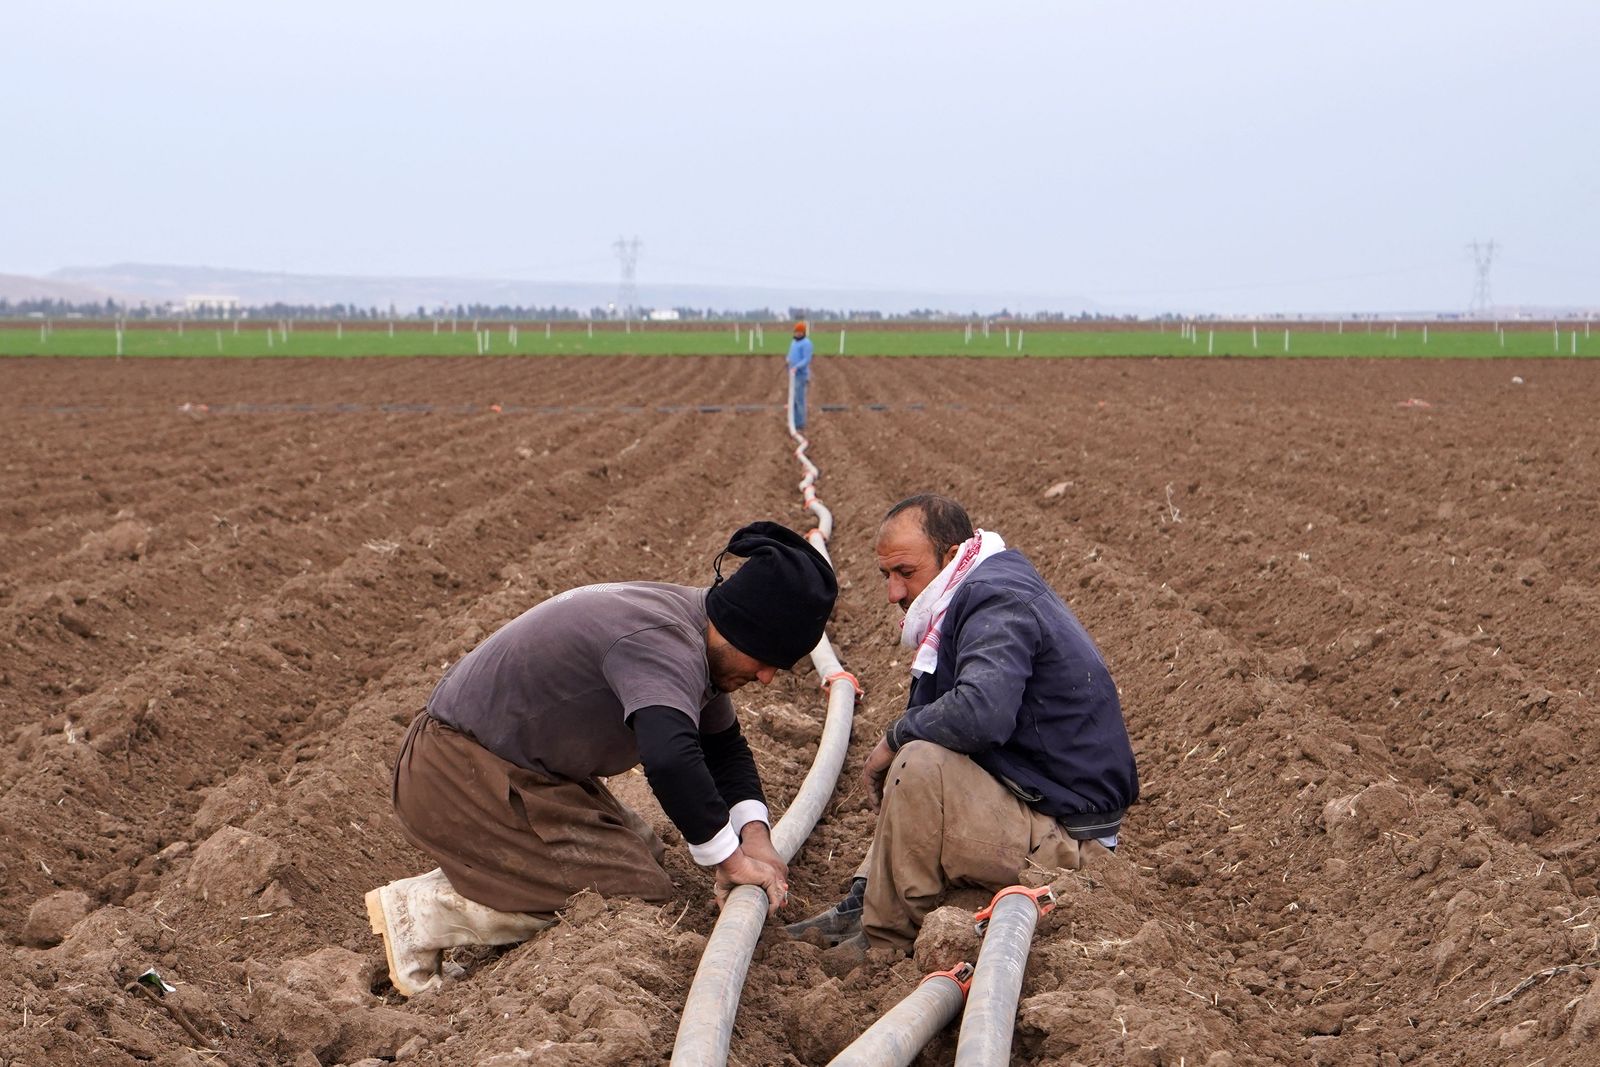 Iraqi Kurdish farmers install irrigation pipes on an agricultural land in the village of Bajid Kandala, situated on the banks of the Tigris river, some 50km west of the northern Iraqi city of Dohuk, on February 18, 2022. - The Tigris is one of Iraq's two big rivers that gave birth to the ancient empires of Sumer and Babylonia and are said to have watered the biblical Garden of Eden. Today, it is dying.Human activity and climate change have choked the once mighty stream that, with its twin the Euphrates, brought to life the civilisations of Mesopotamia thousands of years ago. (Photo by Ismael ADNAN / AFP) - AFP